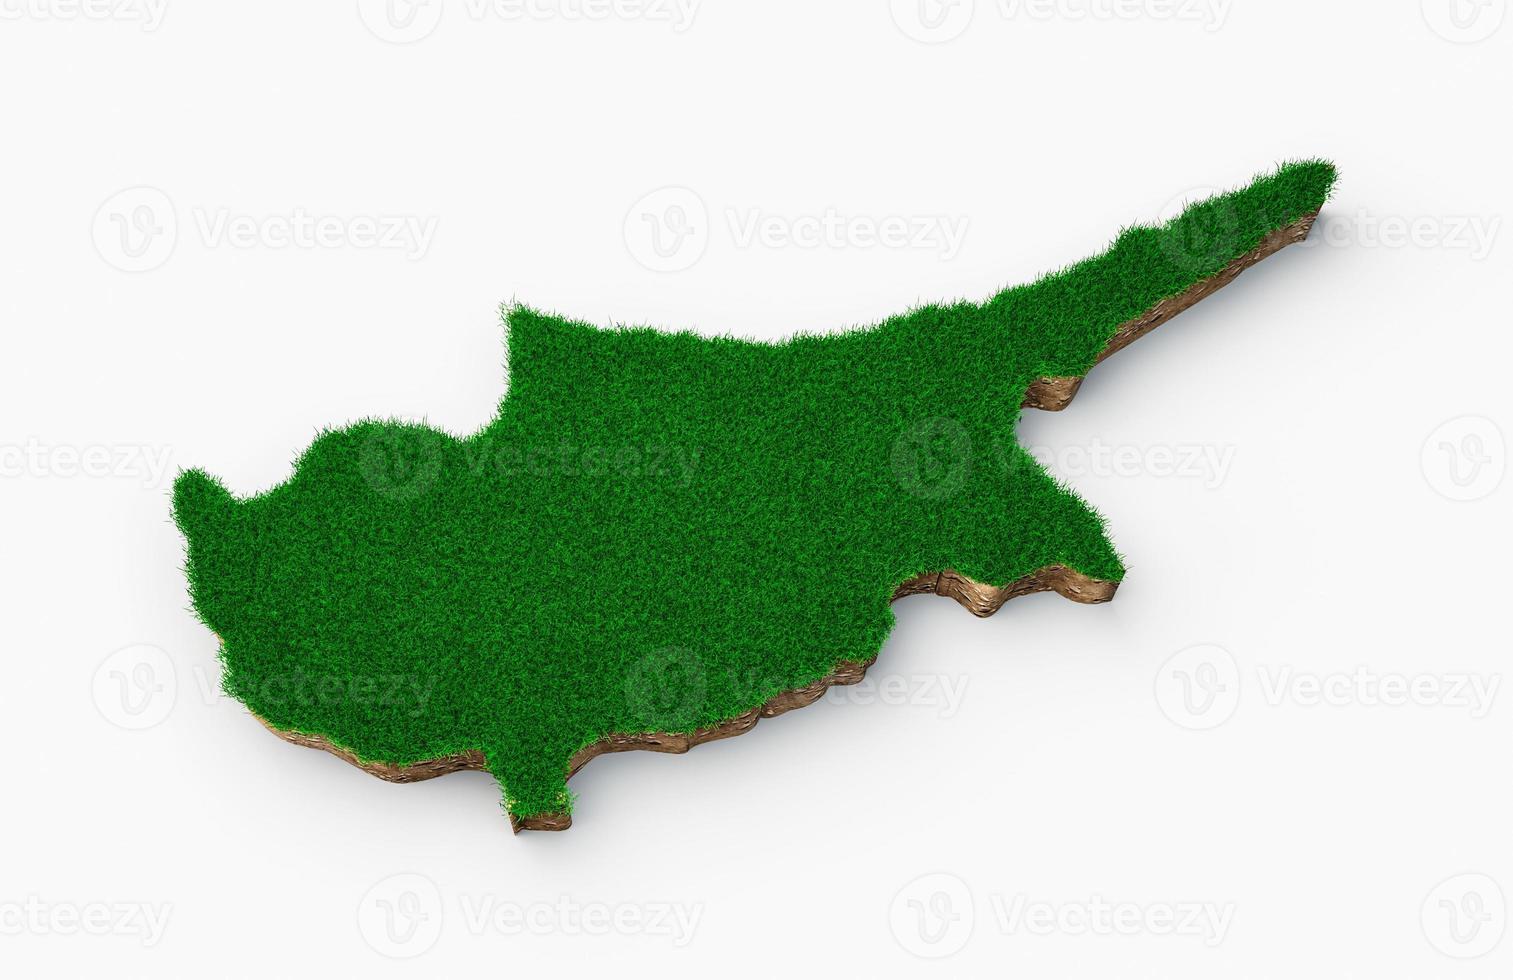 Cyprus Map soil land geology cross section with green grass and Rock ground texture 3d illustration photo